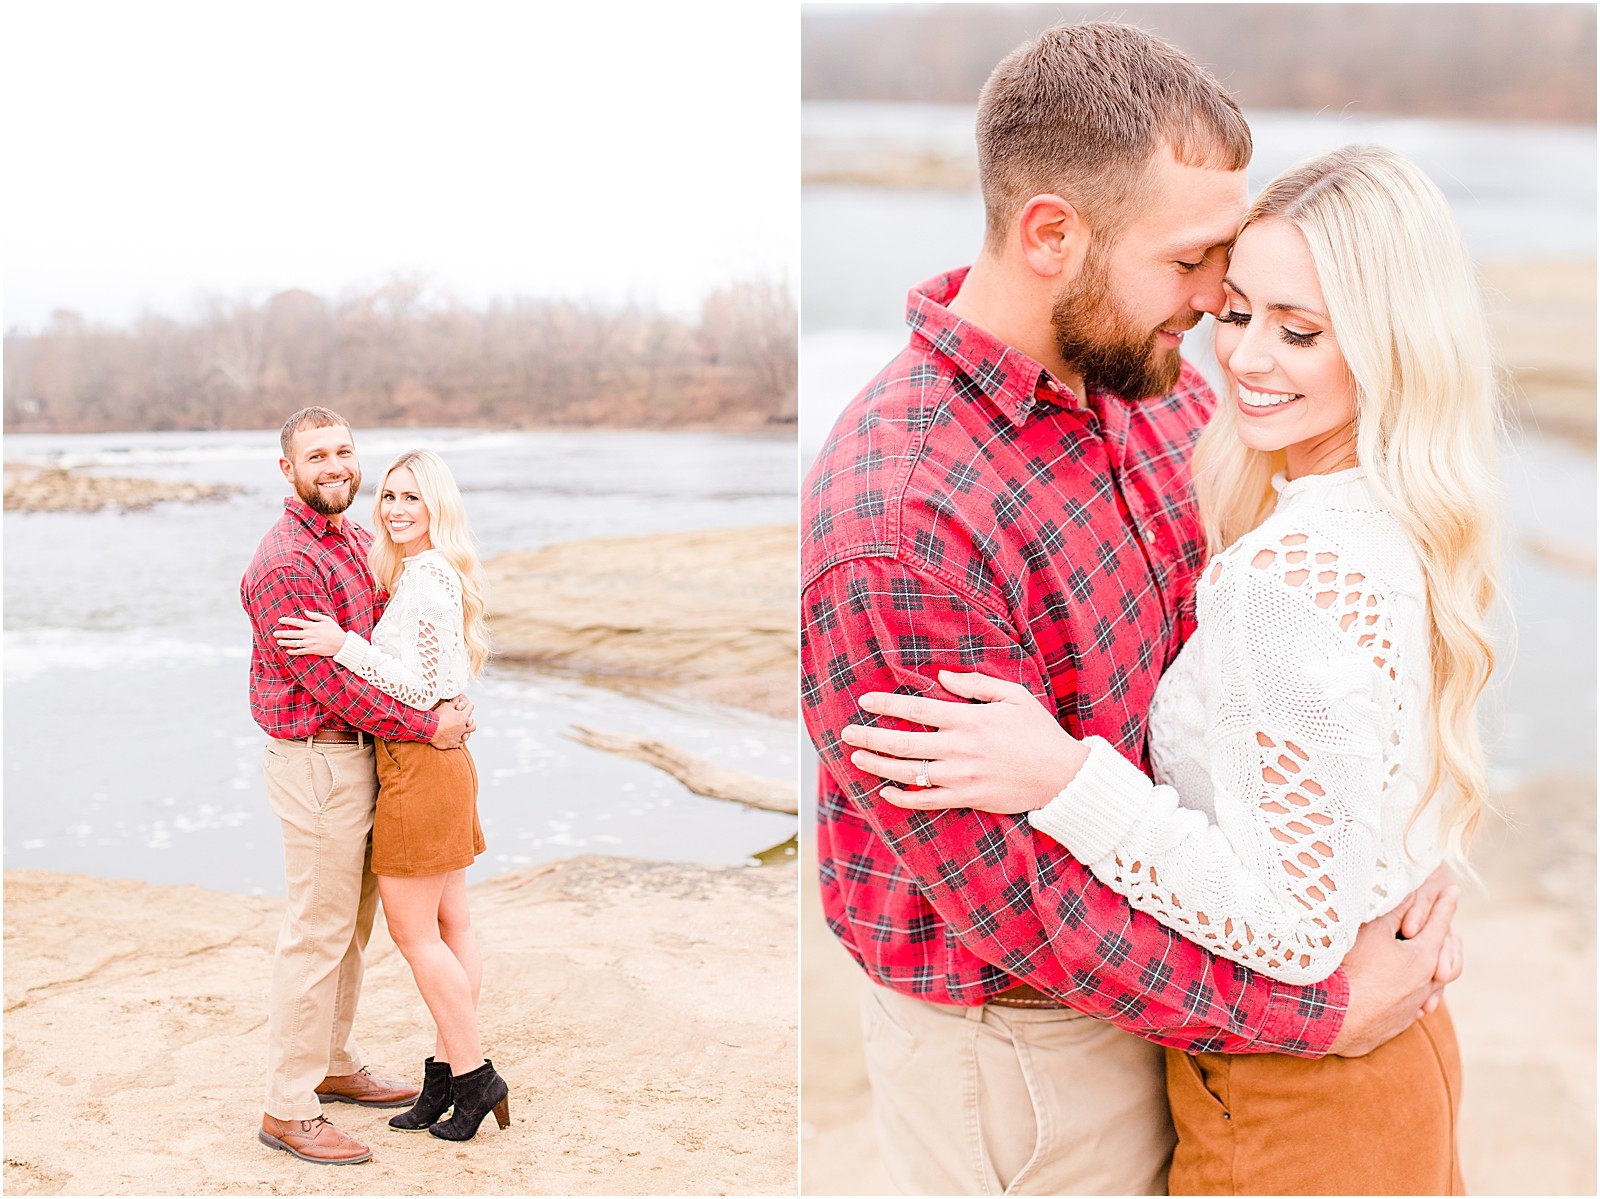 An sweet and snuggly fall anniversary session in Loogootee, Indiana. | #anniversarysession #fallsession #southernindianawedding | 003.jpg